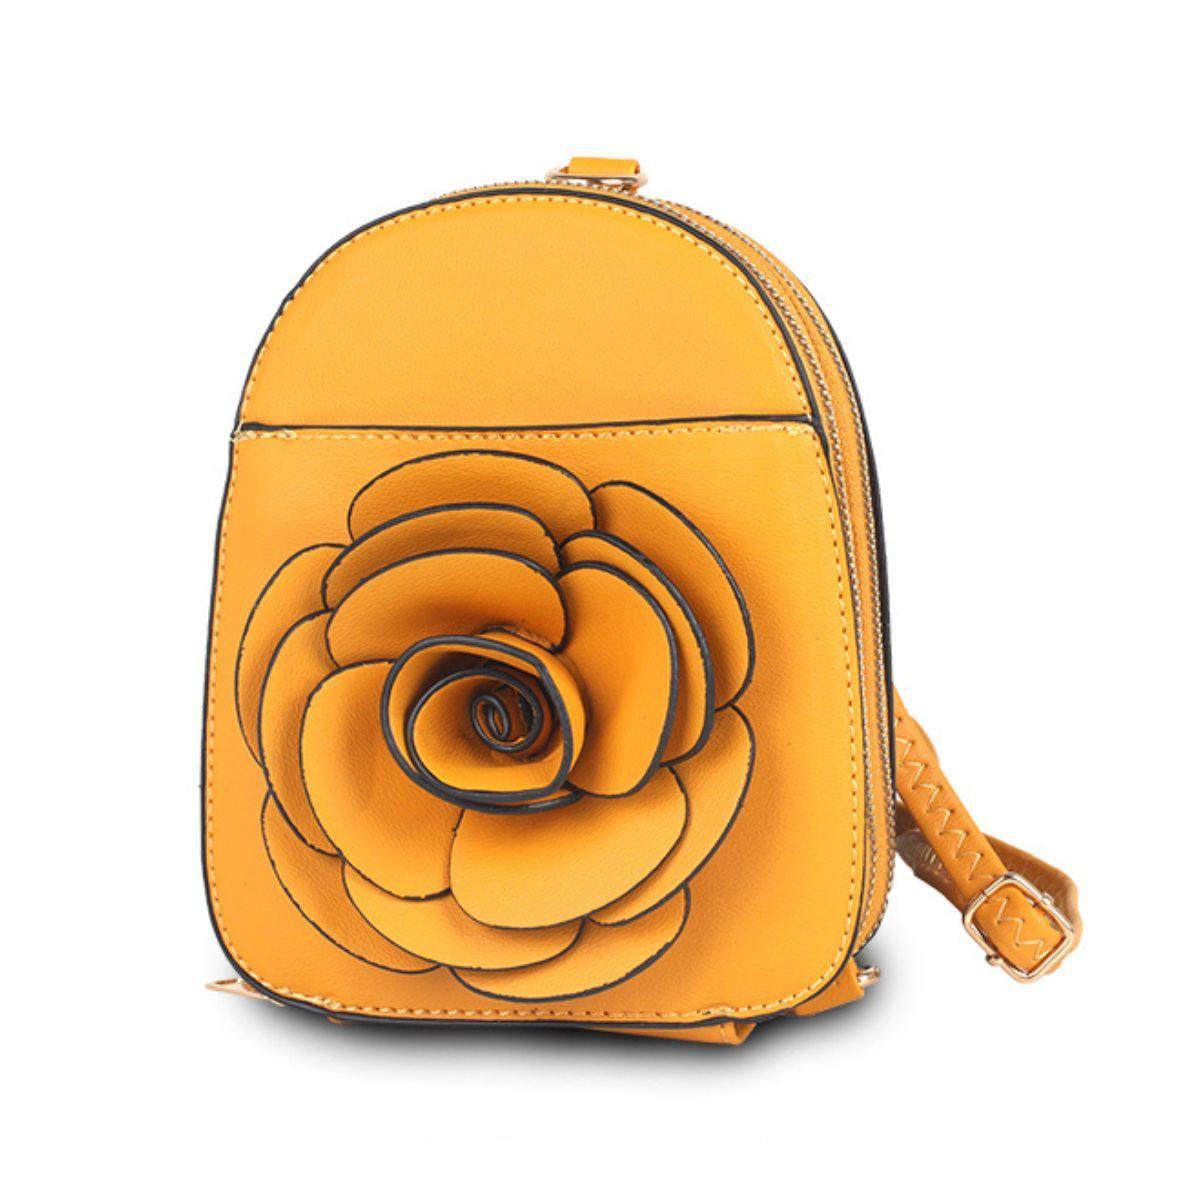 Mustard Yellow Vegan Leather Floral Mini Backpack: Stylish & Secure